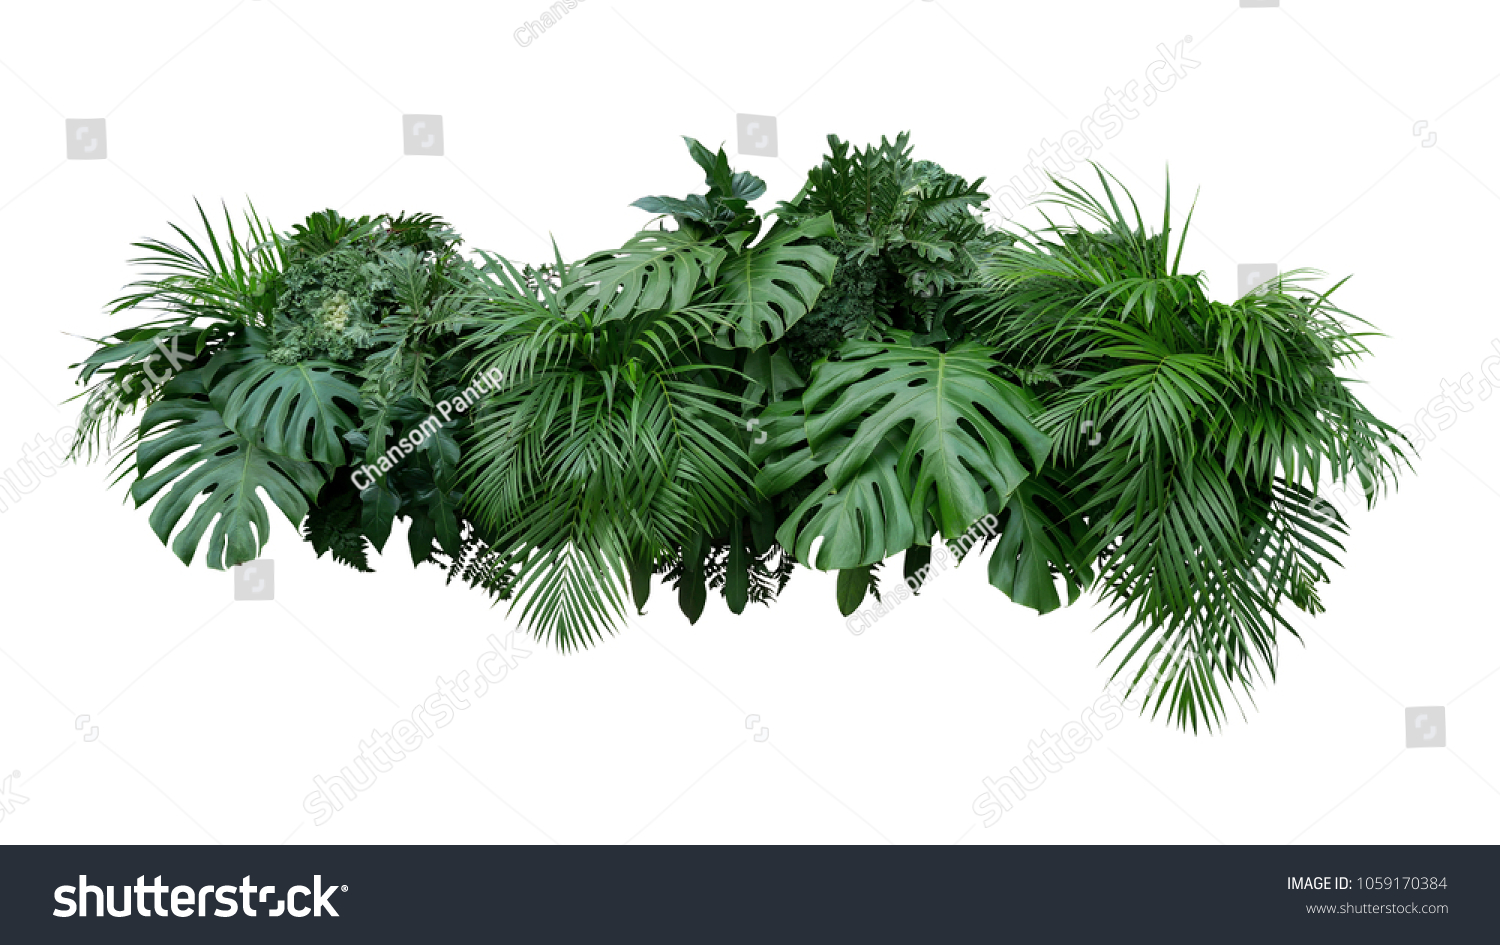 Tropical leaves foliage plant bush floral arrangement nature backdrop isolated on white background, clipping path included. #1059170384